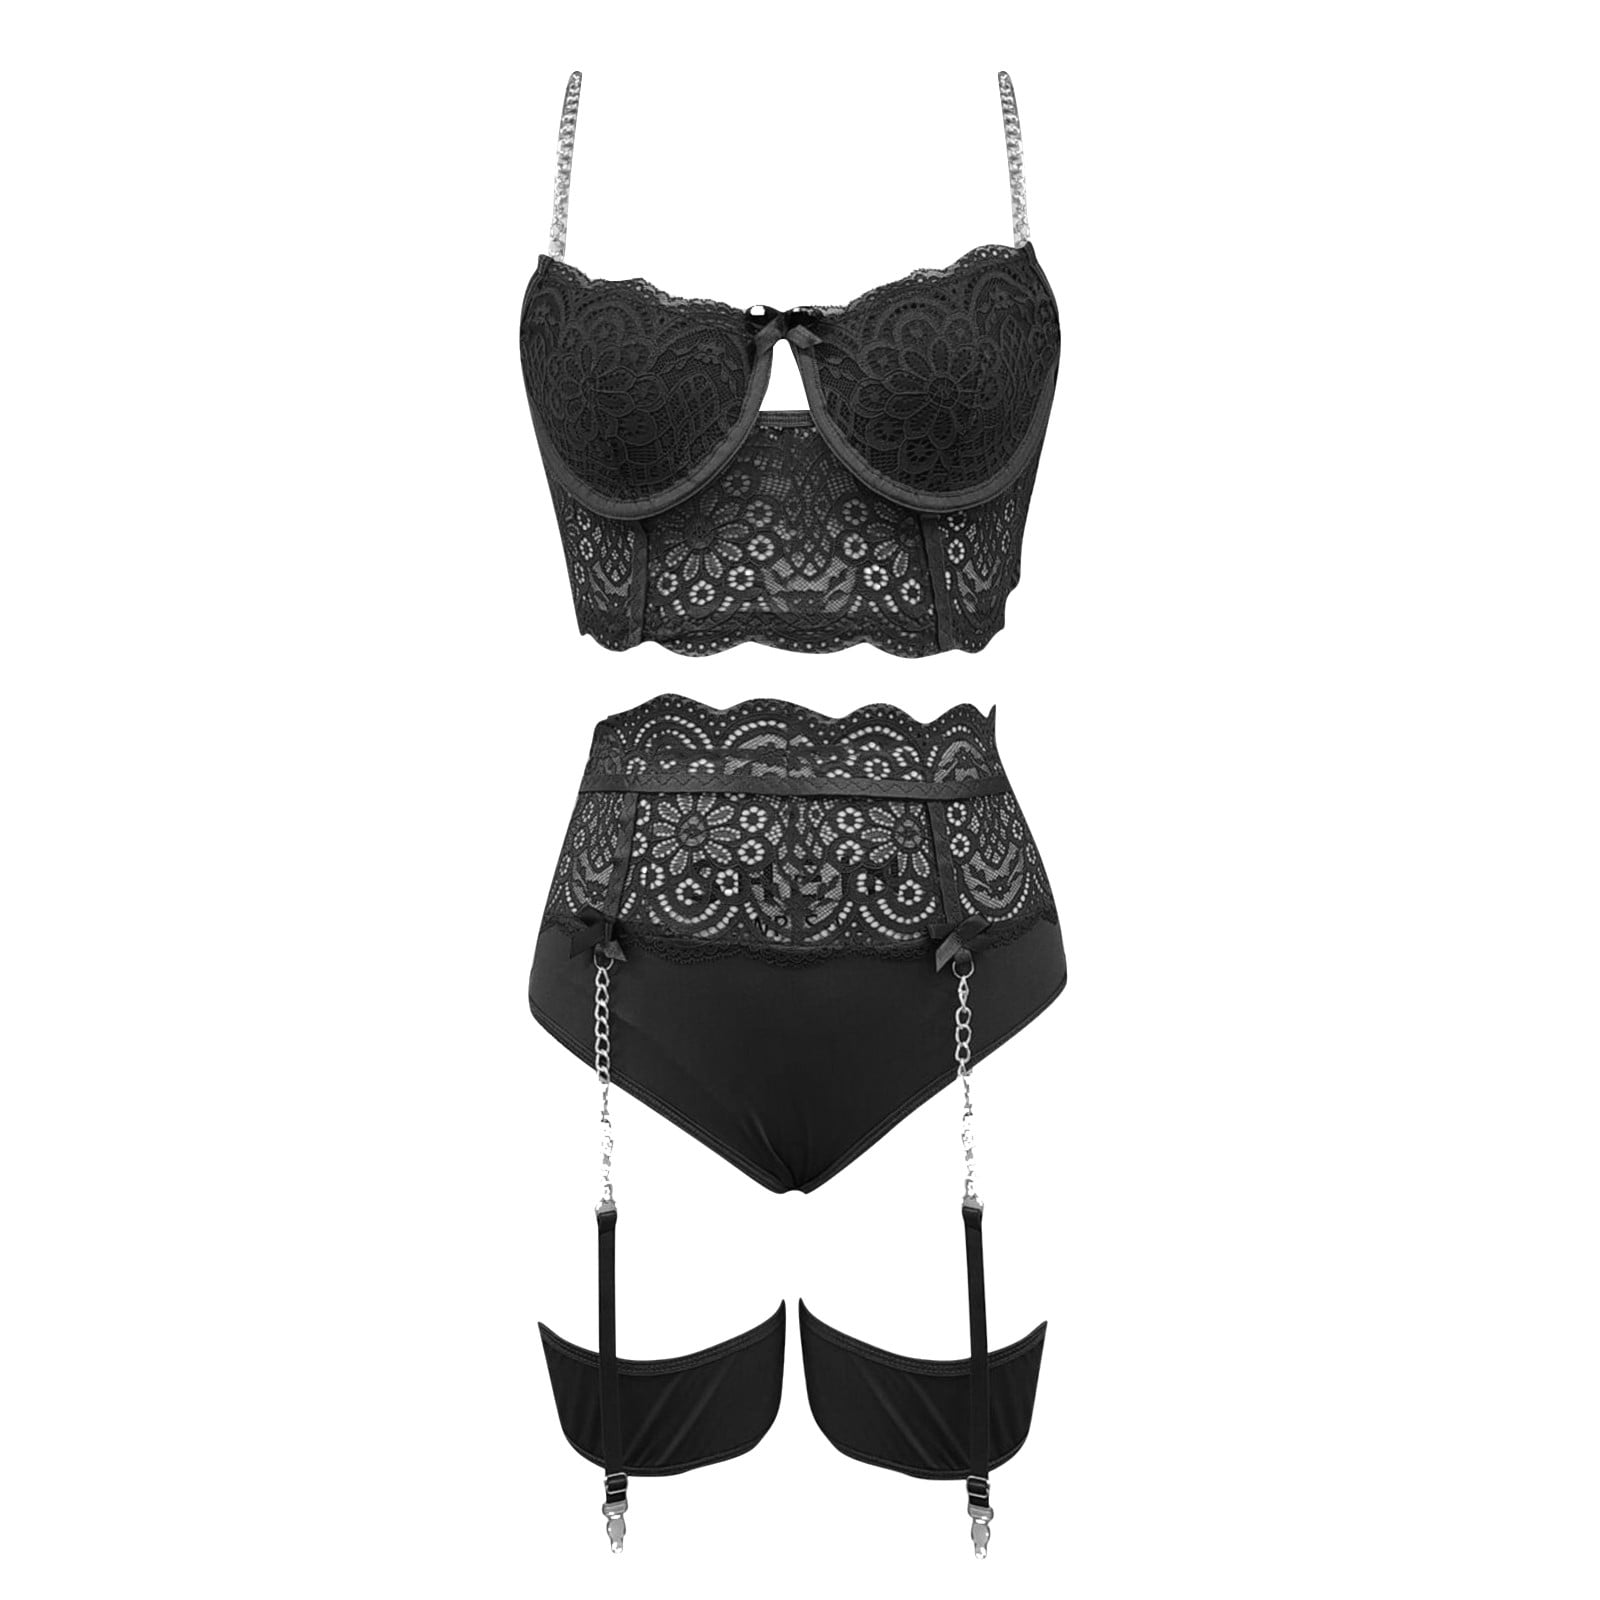 PMUYBHF Women Lingerie Lace Crochet Cutout Embroidery Bra and High Waist  Panty Set Push Up Sets Athartle Bodysuit Lingerie for Women with Stockings